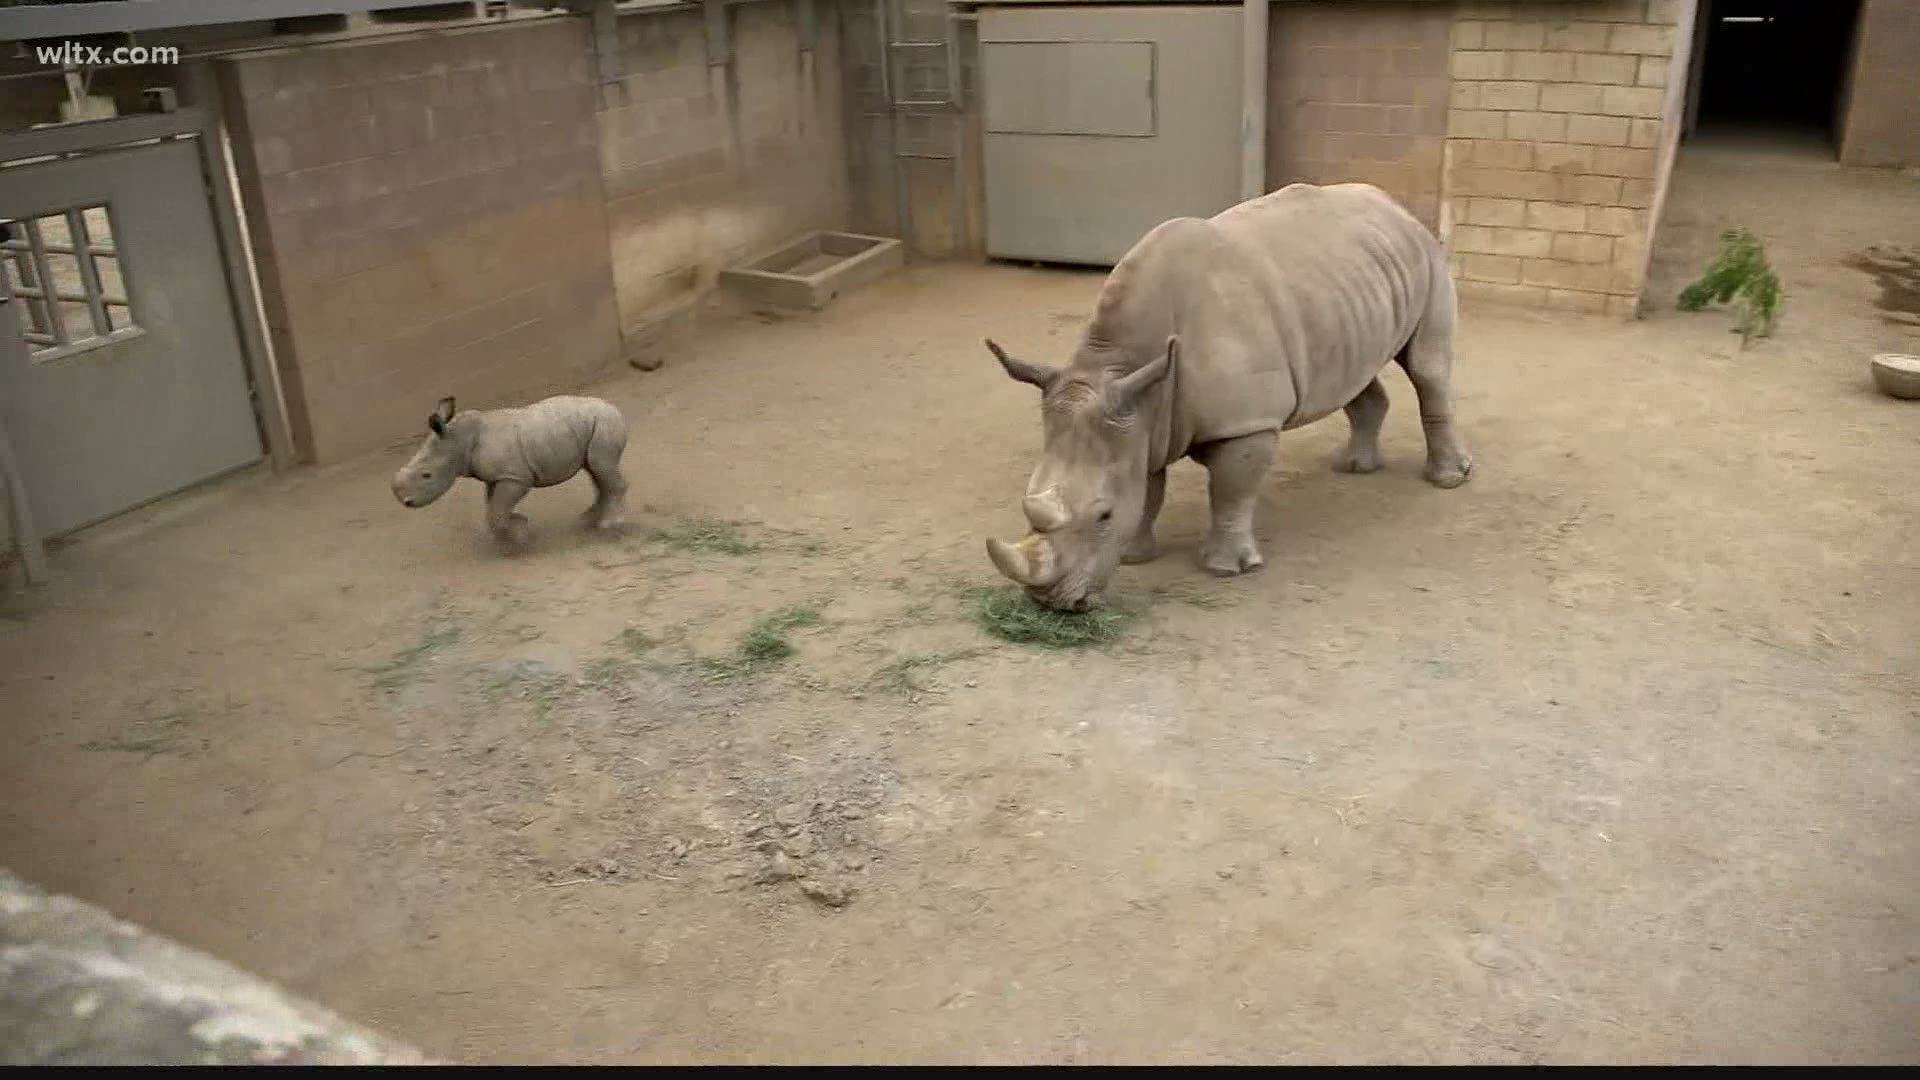 Kande (kahn-day),8 and 2-year-old Winnifred are both female Southern White Rhinos, the second largest land animal behind elephants.